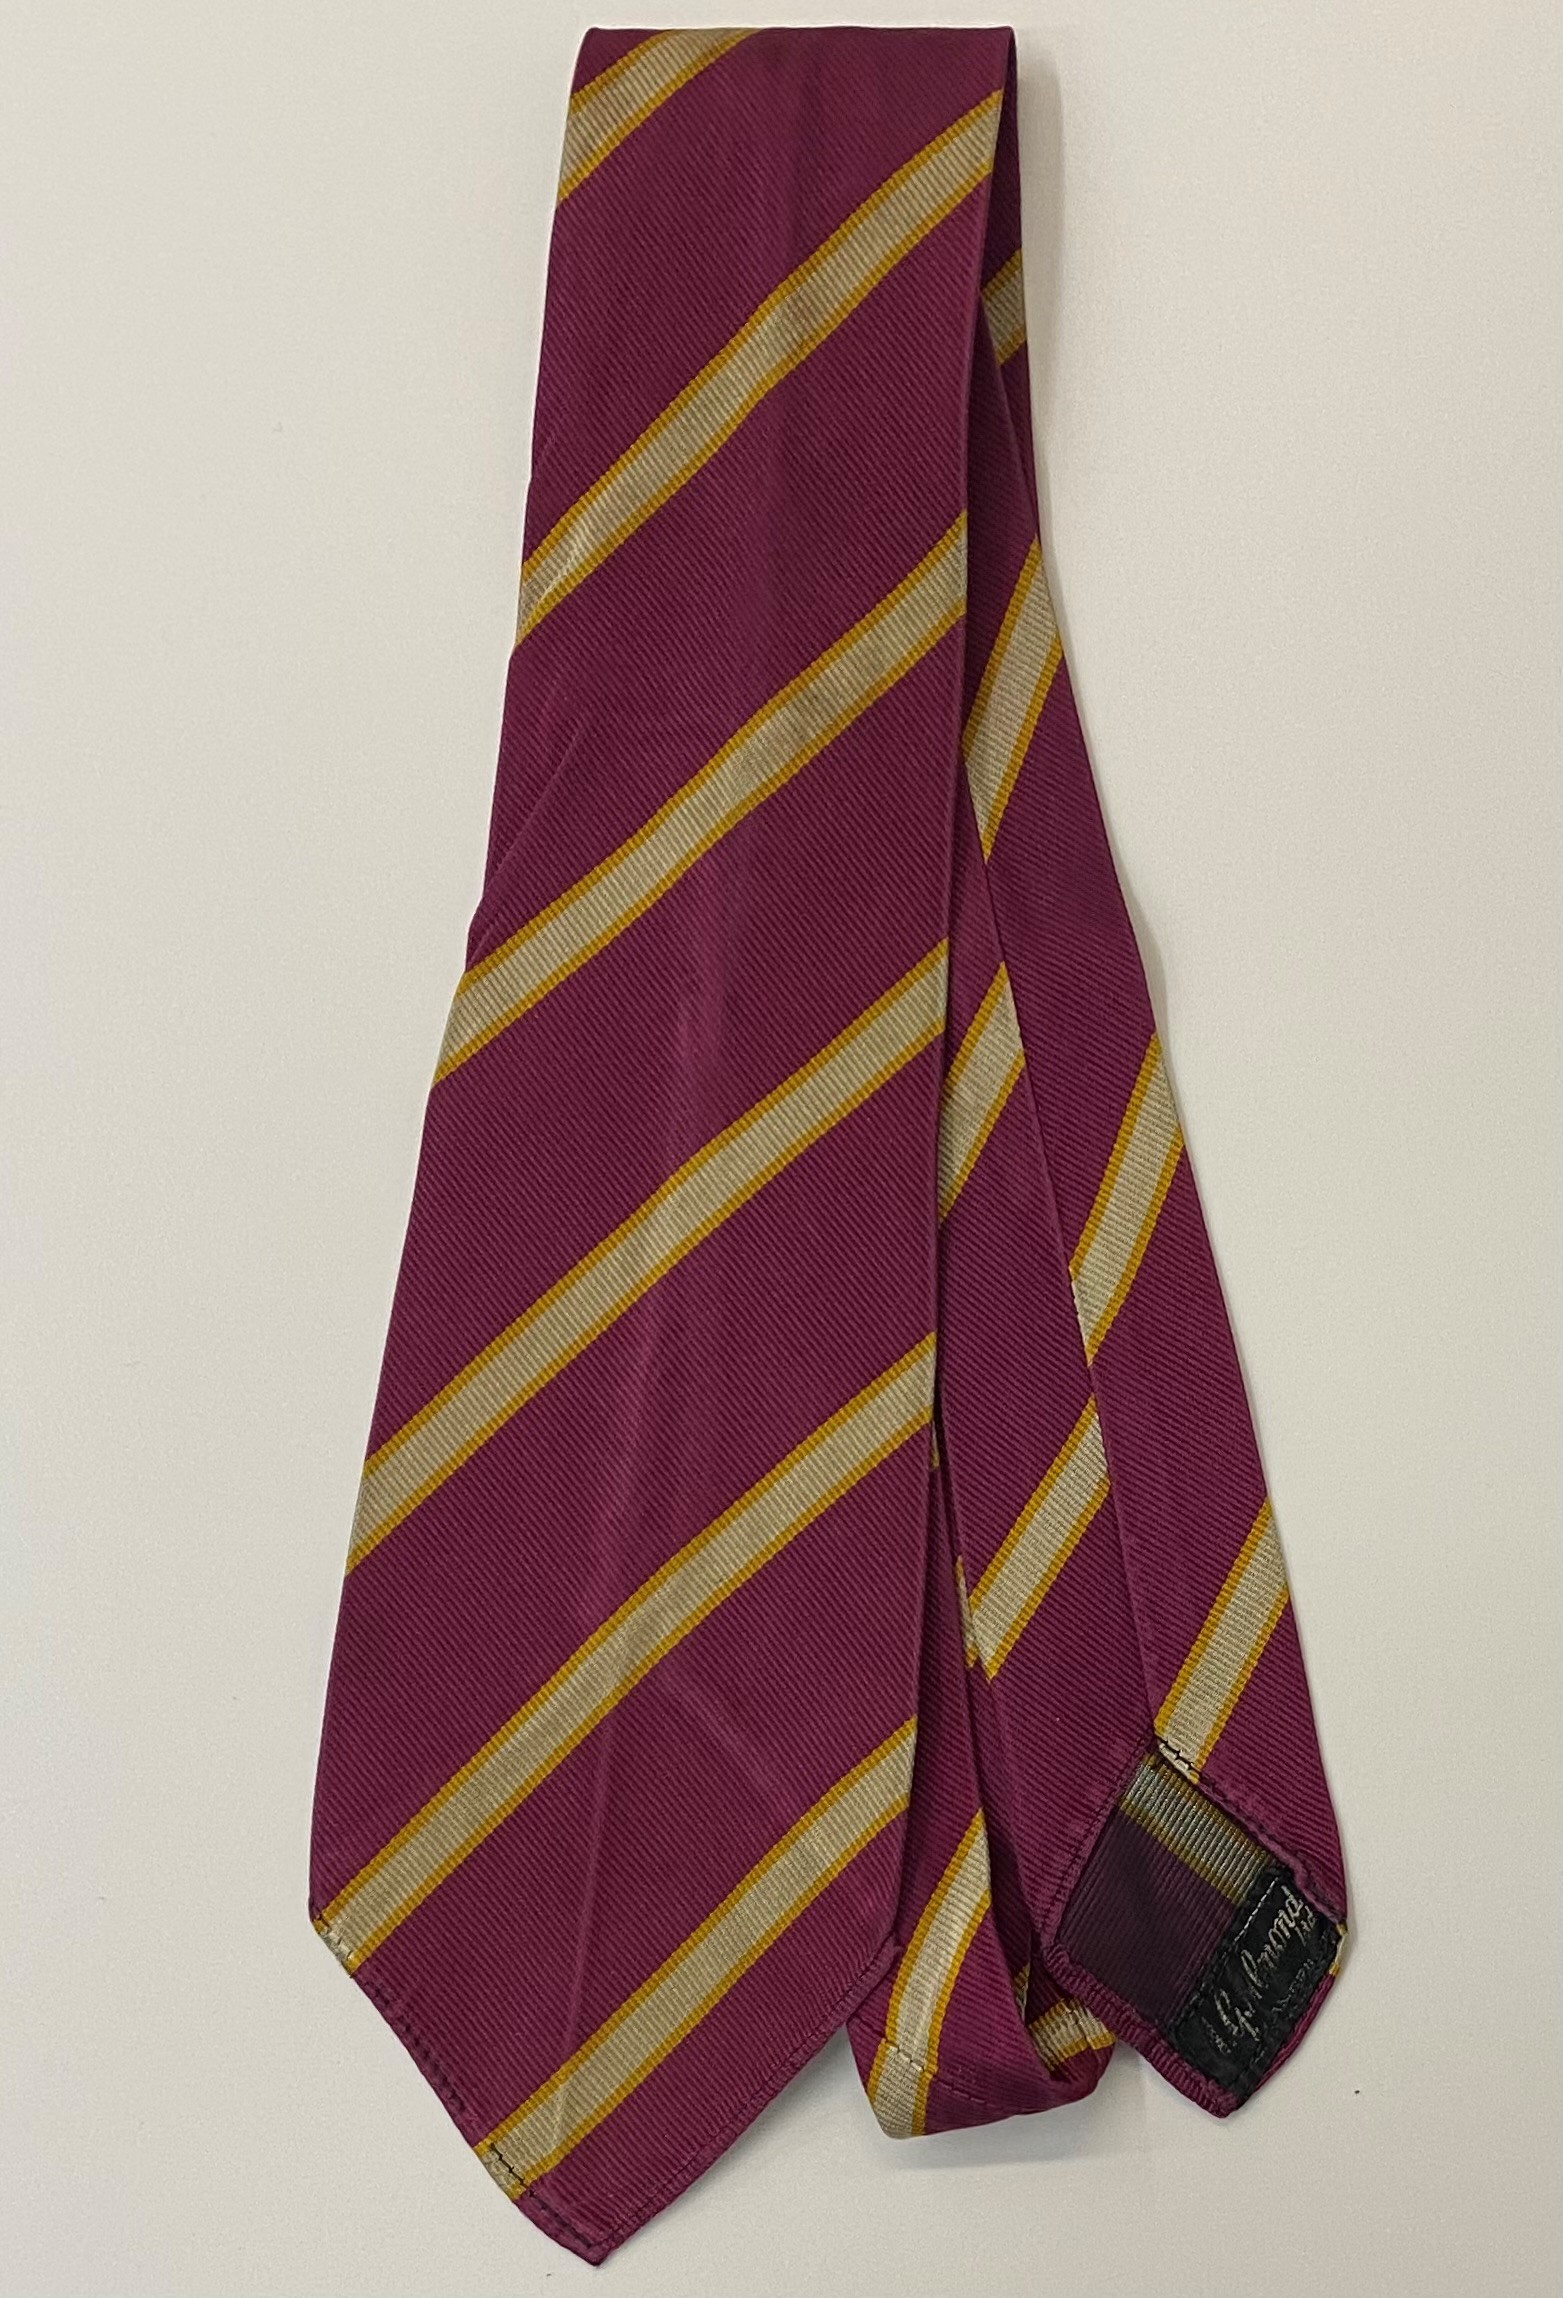 Picture of the striped Cranworth Law Society tie, 1958